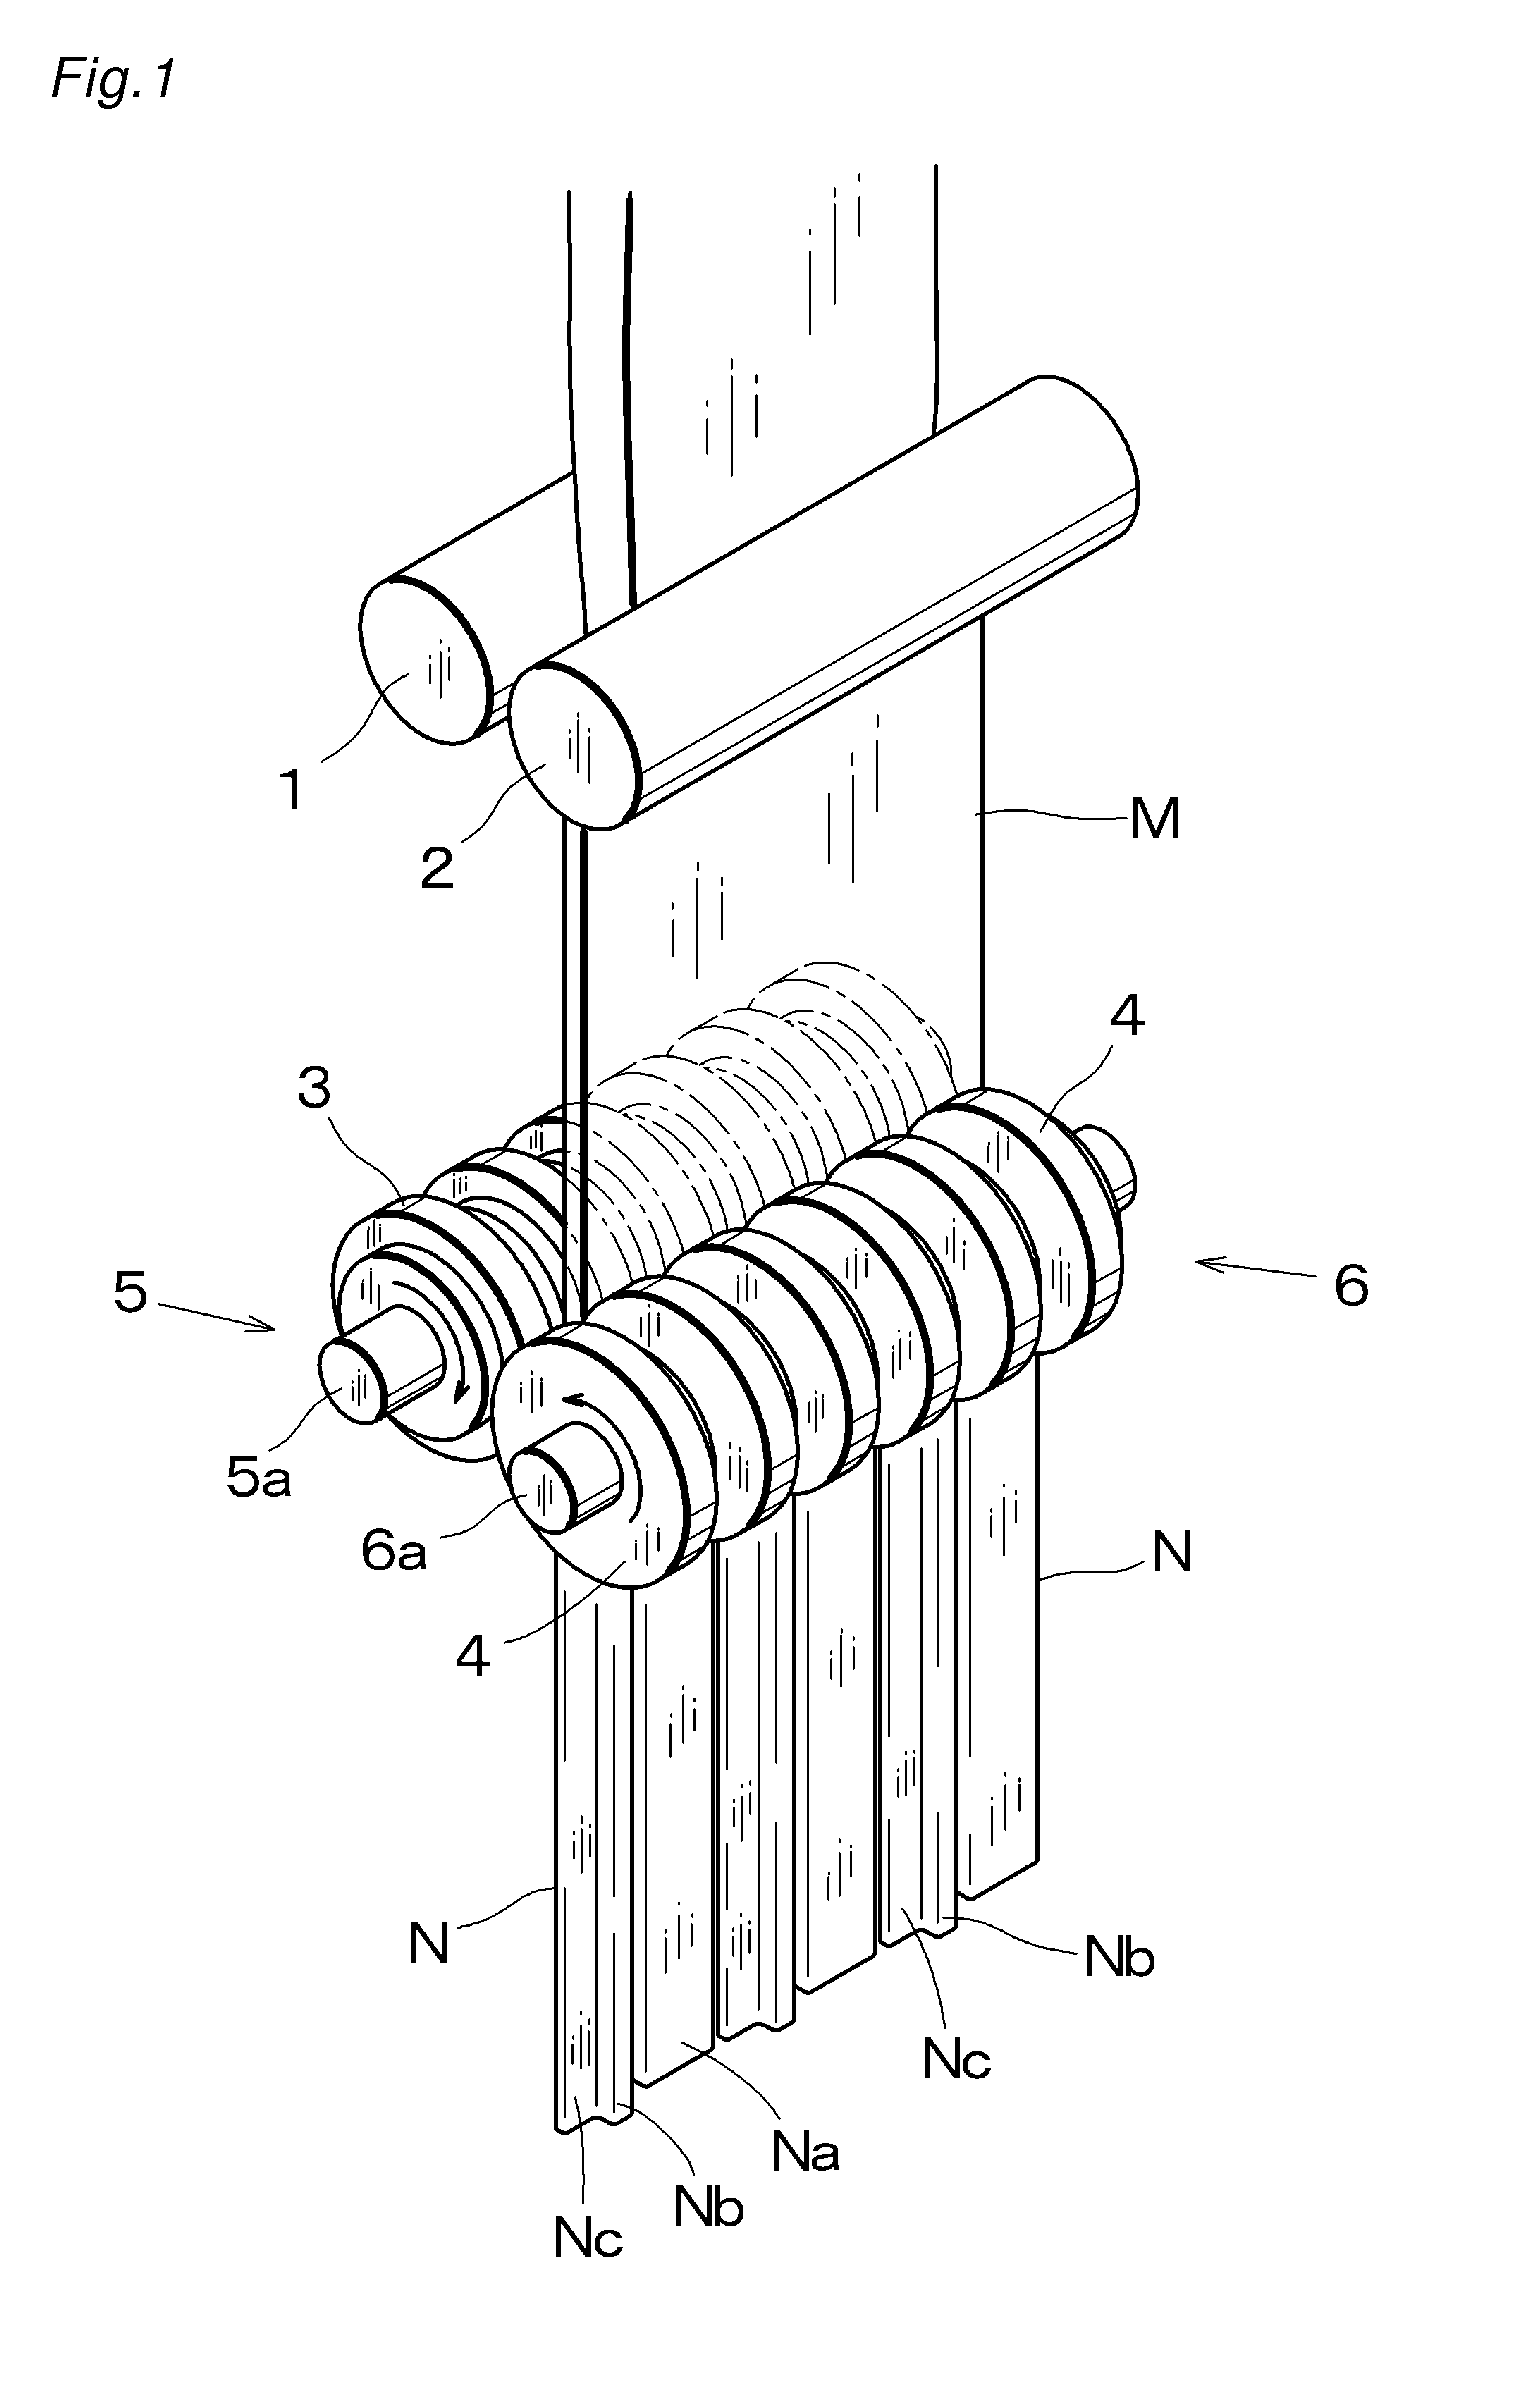 Noodles and apparatus for processing the same